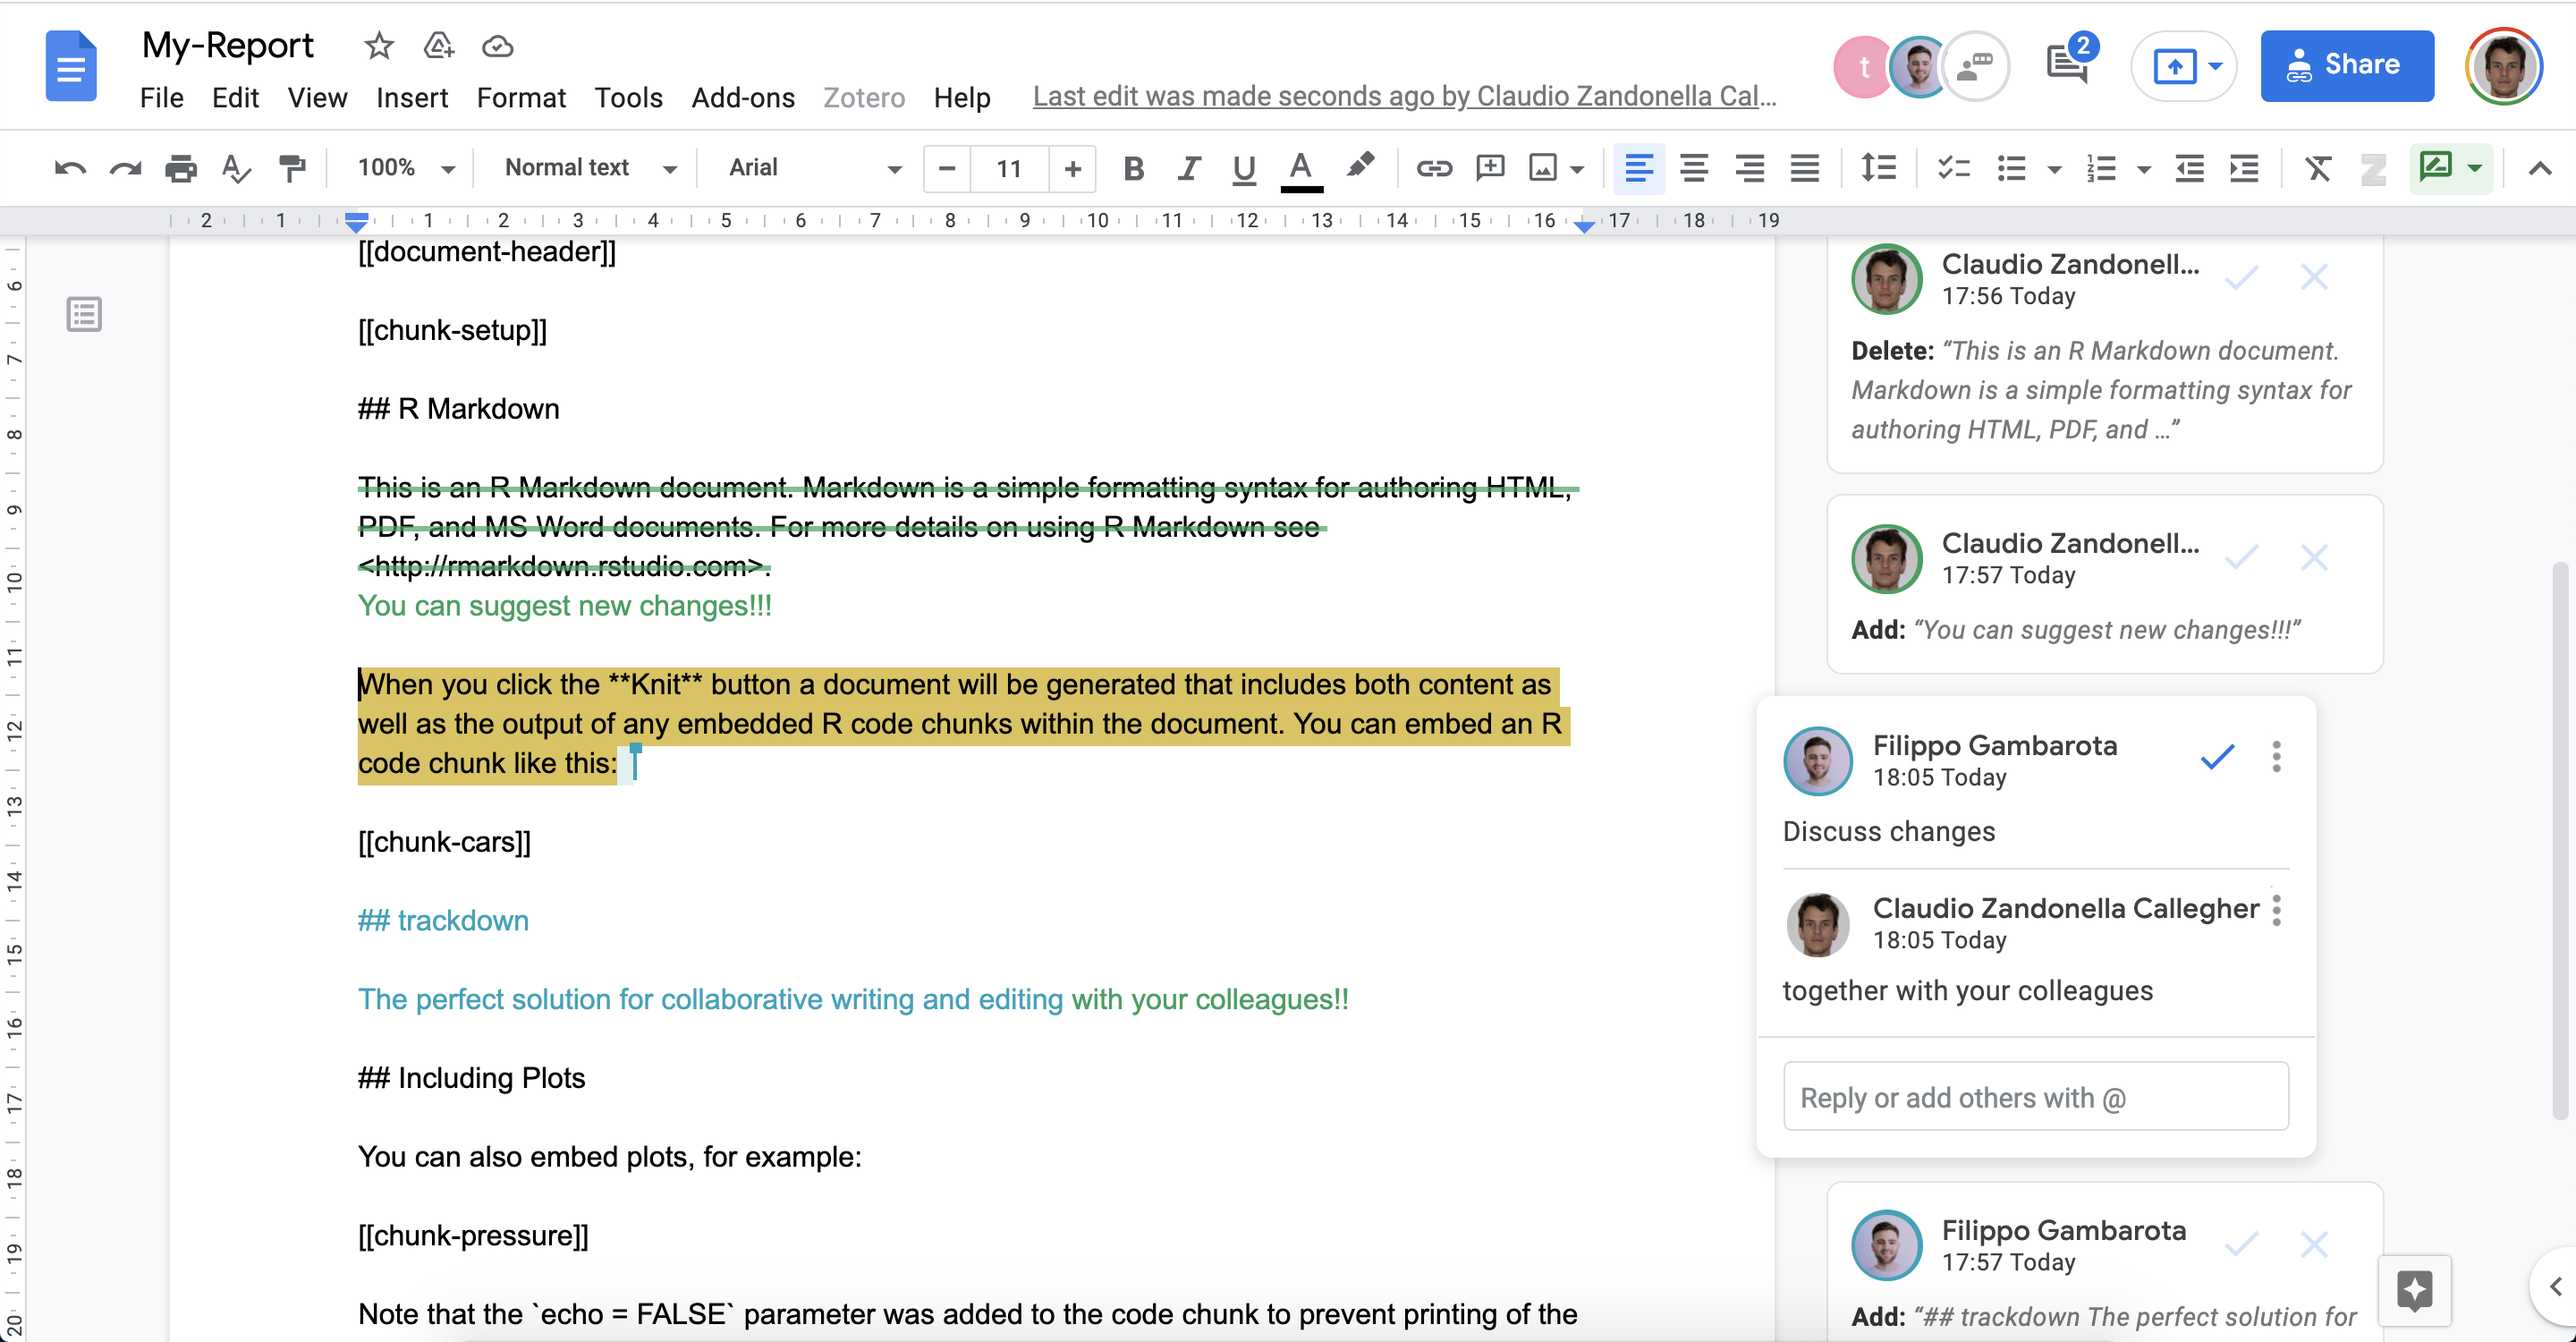 Exampel of collaboration in the review and editing of a document in Google Docs (i.e., comments, addition and deletion of text) 